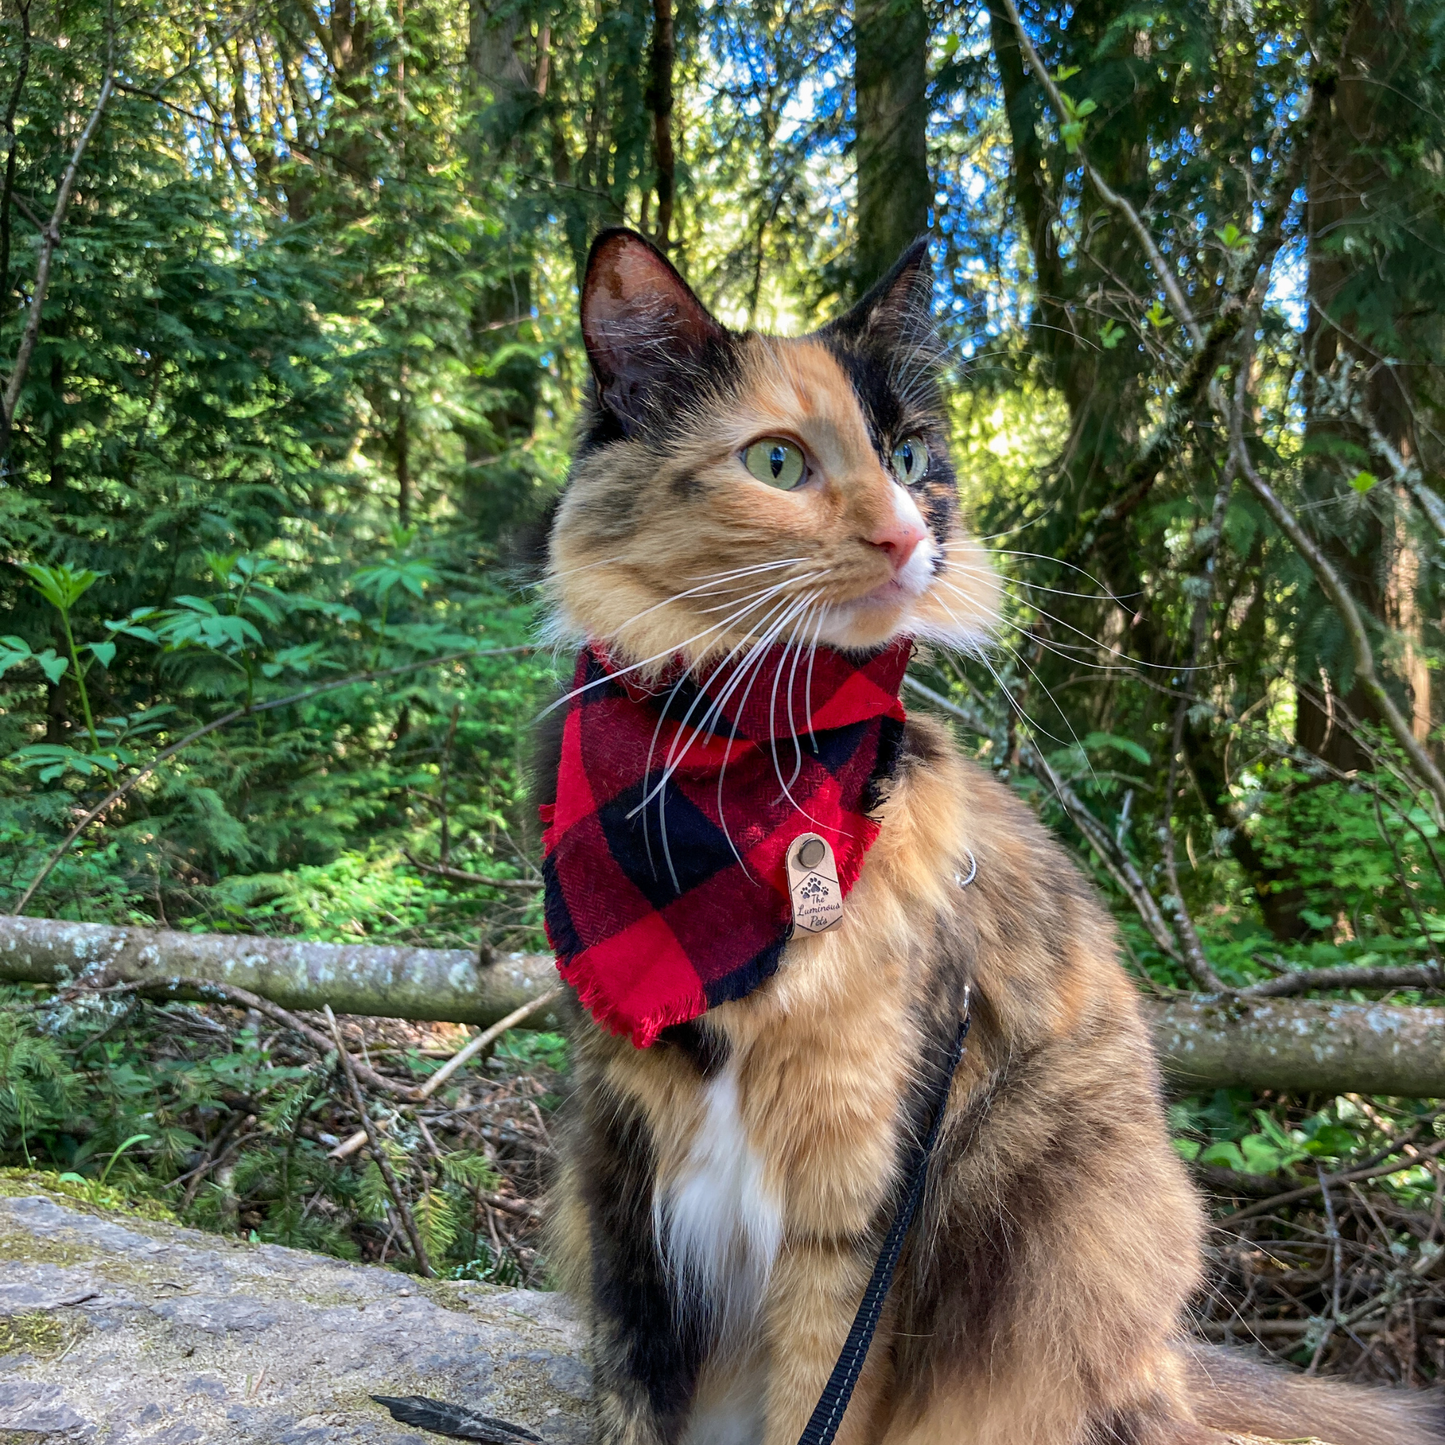 Torbie adventure cat on a forest hike in a buffalo plaid cat bandana | Handmade cat accessories by The Luminous Pets